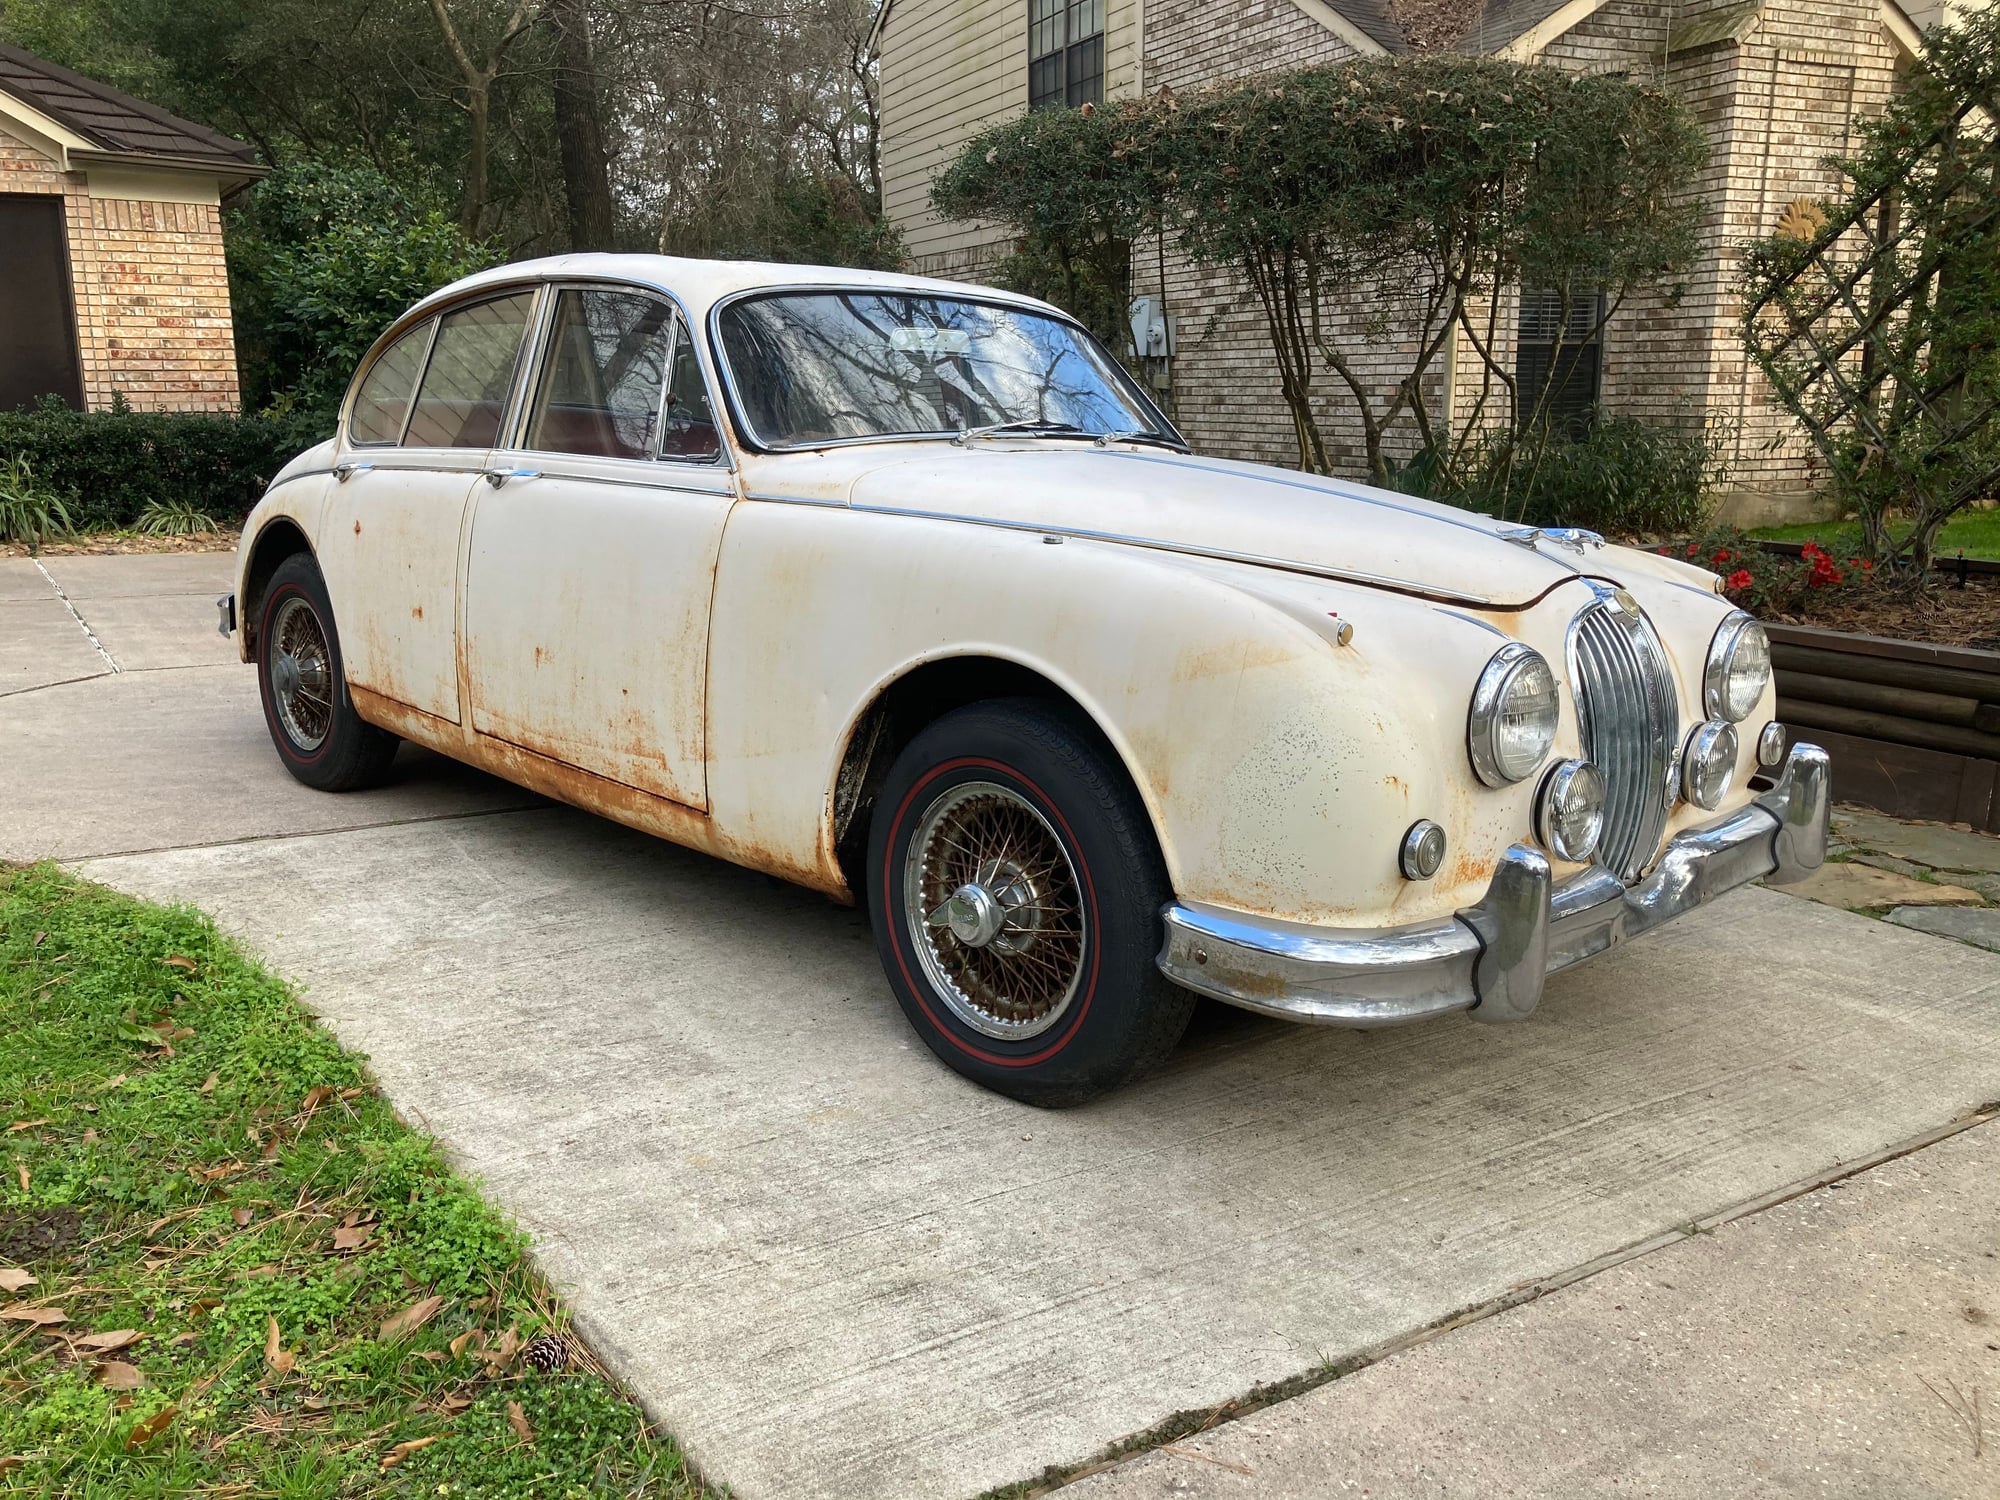 1961 Jaguar 3.8 - Rare 1961 Jaguar Mk2 3.8 MoD wire wheels with factory steel sunroof - Bring a Trailer - Used - VIN 217872DN - 88,000 Miles - 6 cyl - 2WD - Manual - Sedan - White - The Woodlands, TX 77381, United States